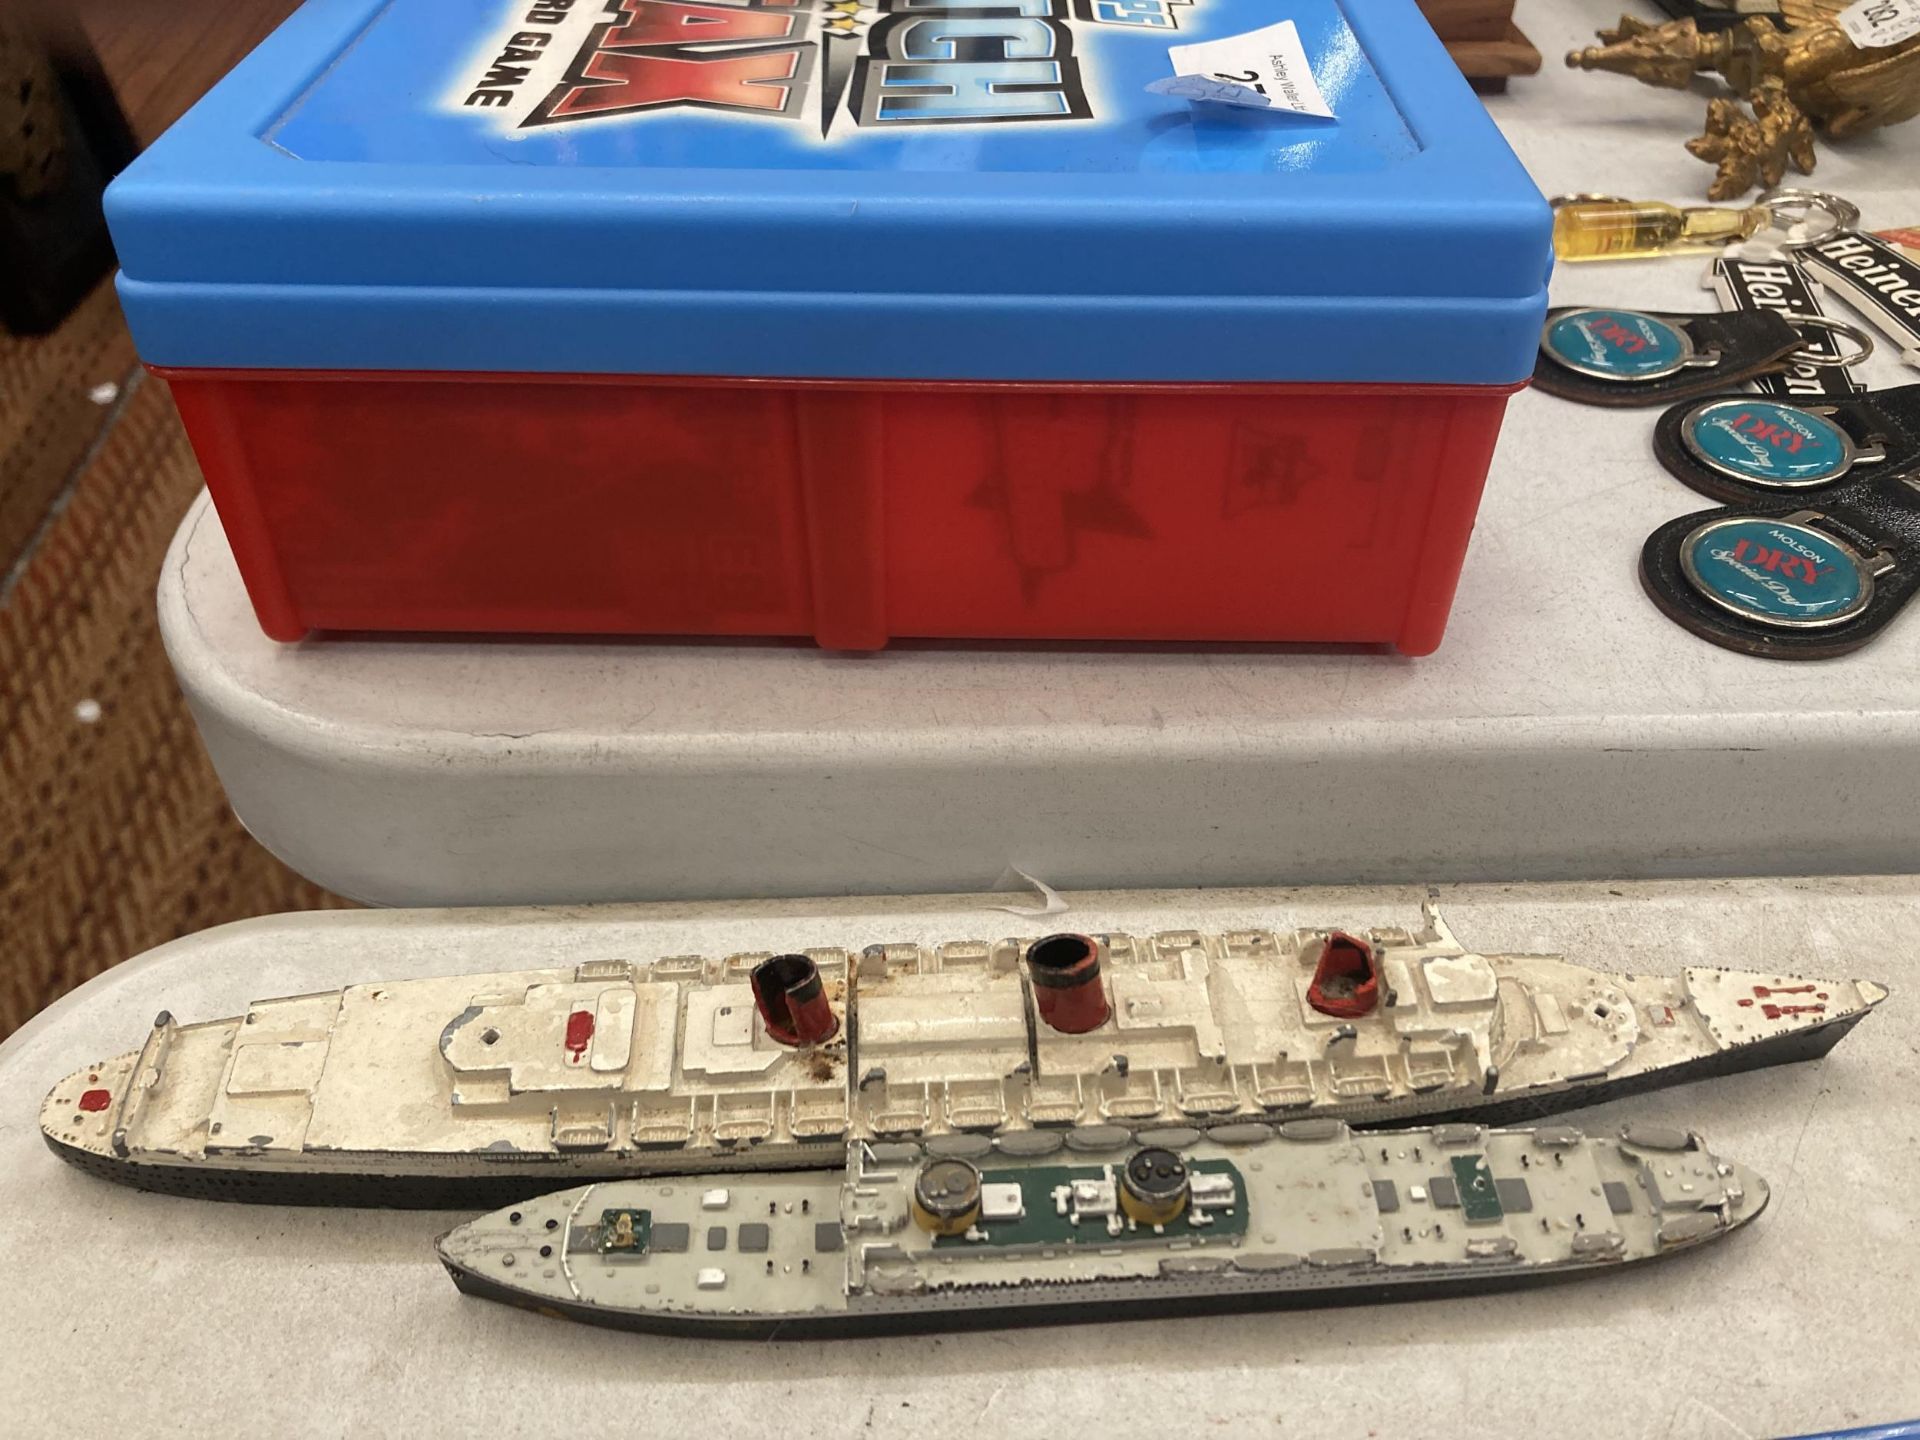 TWO VINTAGE DIE-CAST SHIPS QUEEN MARY AND BRITANNIC